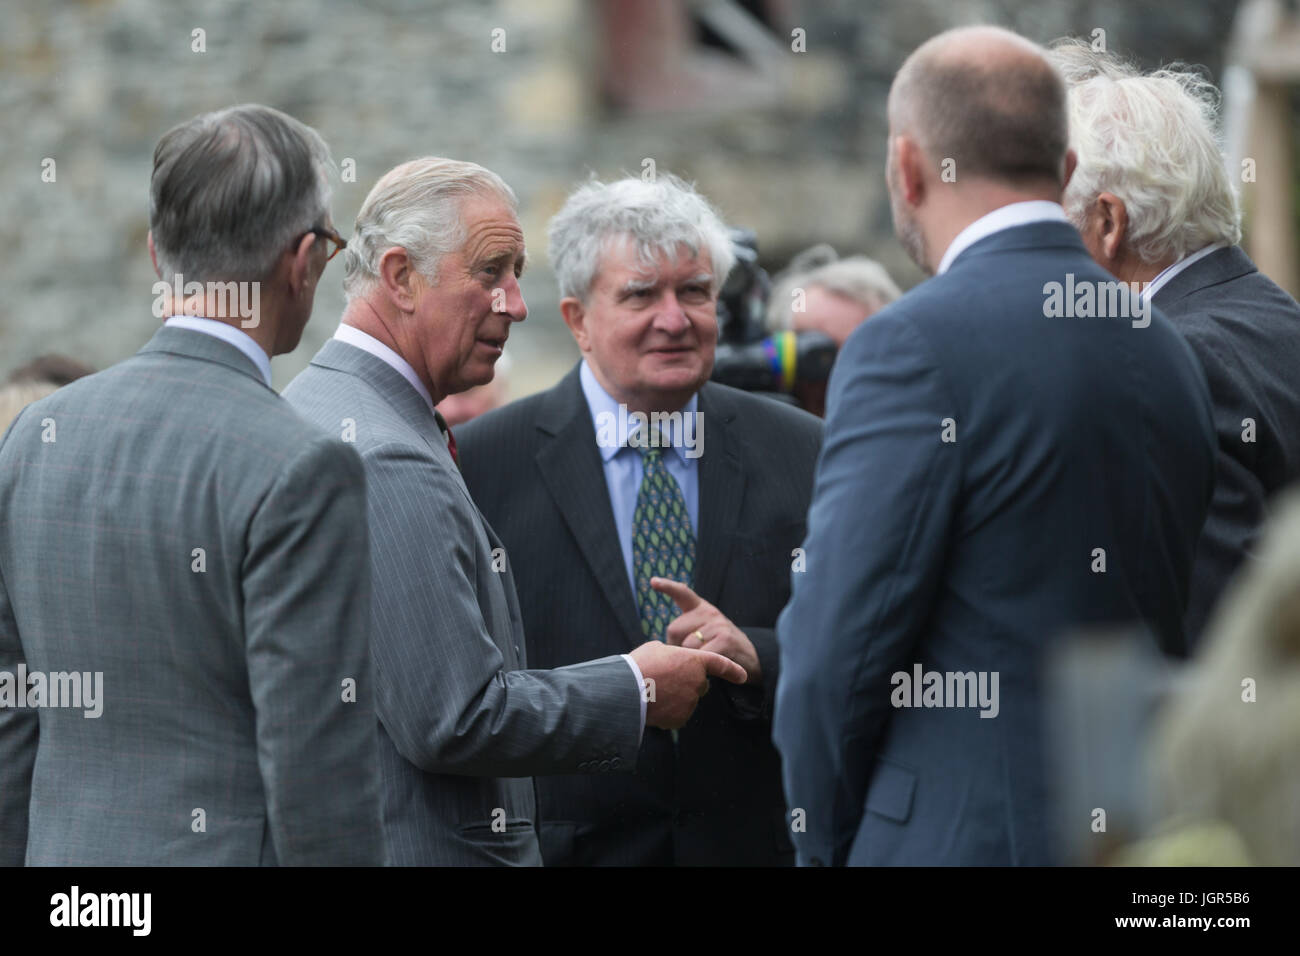 The Prince of Wales on his visit to Strata Florida, the site of a former Cistercian Abbey near Pontrhydfendigaid as he continues his summer tour around Wales. Credit: Ian Jones/Alamy Live News Stock Photo